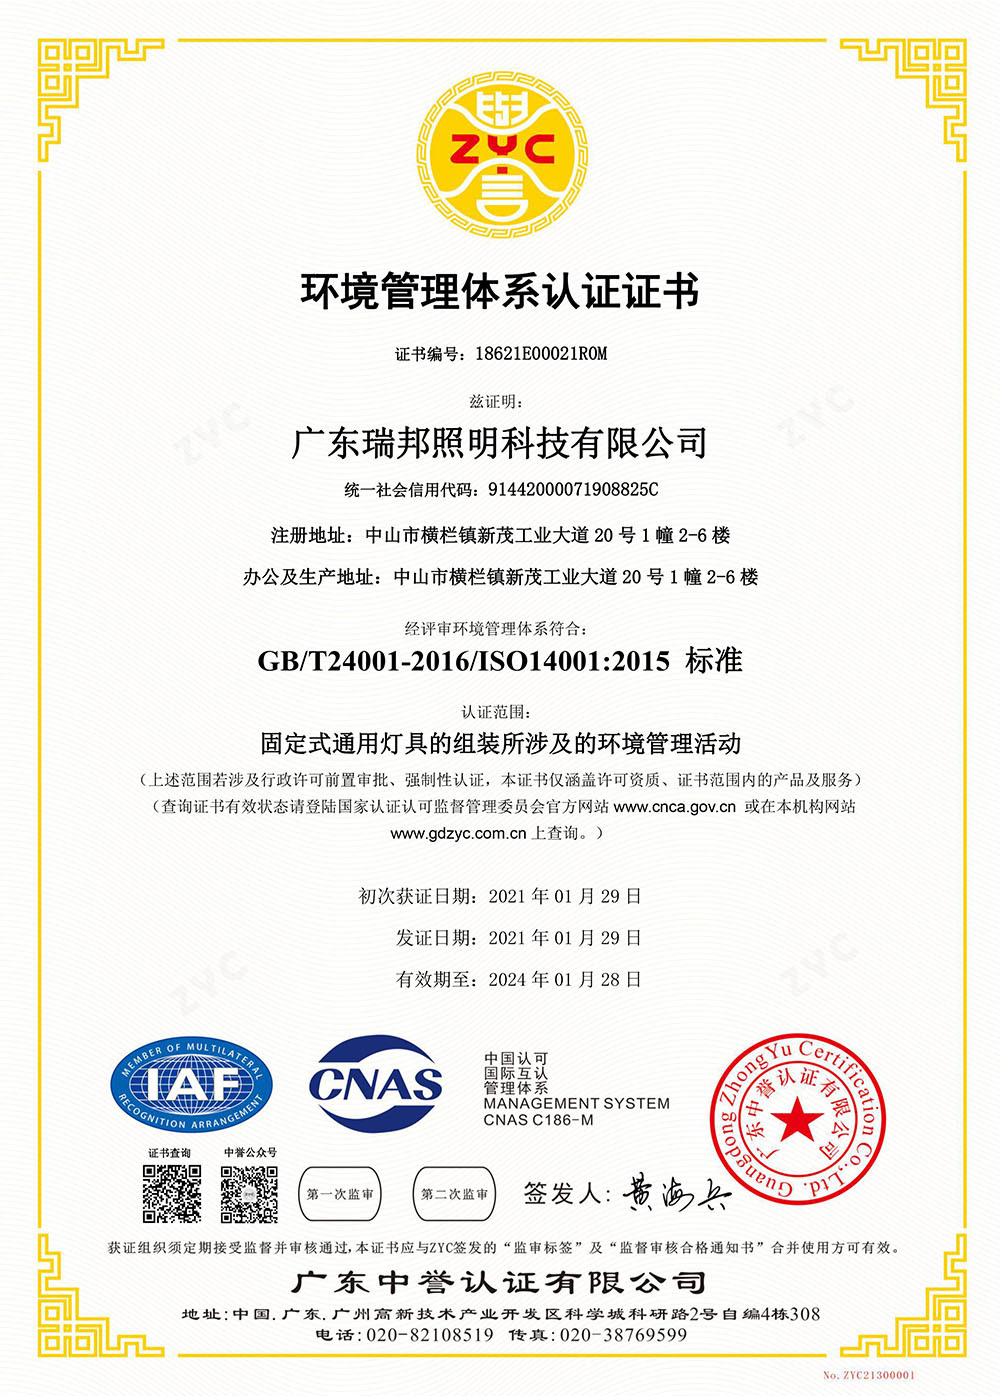 Environmental management system certification ISO14001 Chinese